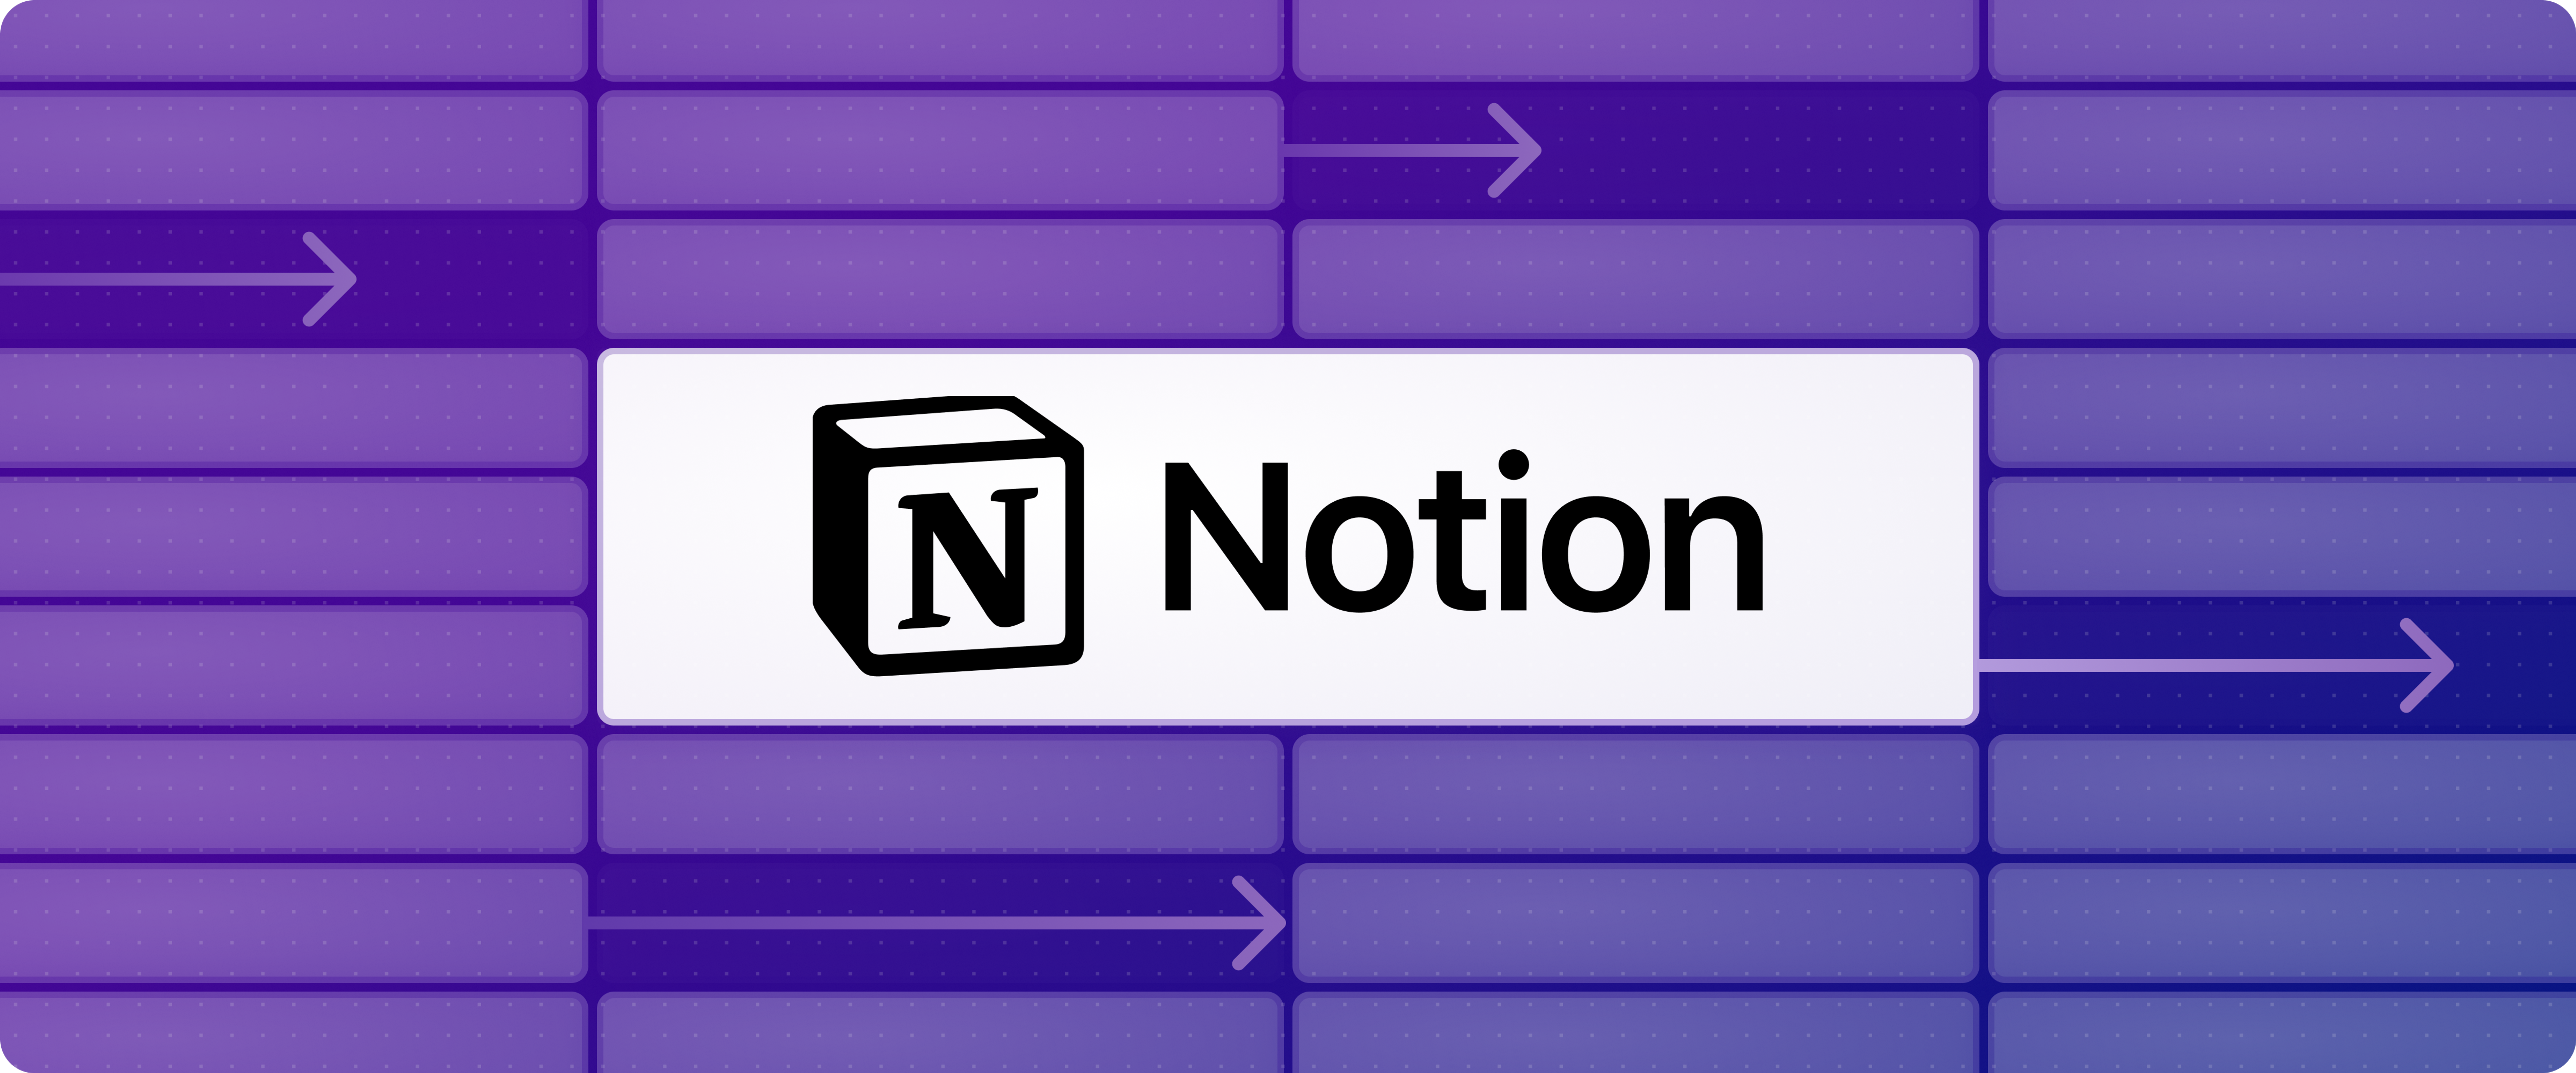 Decorative banner with Notion logo